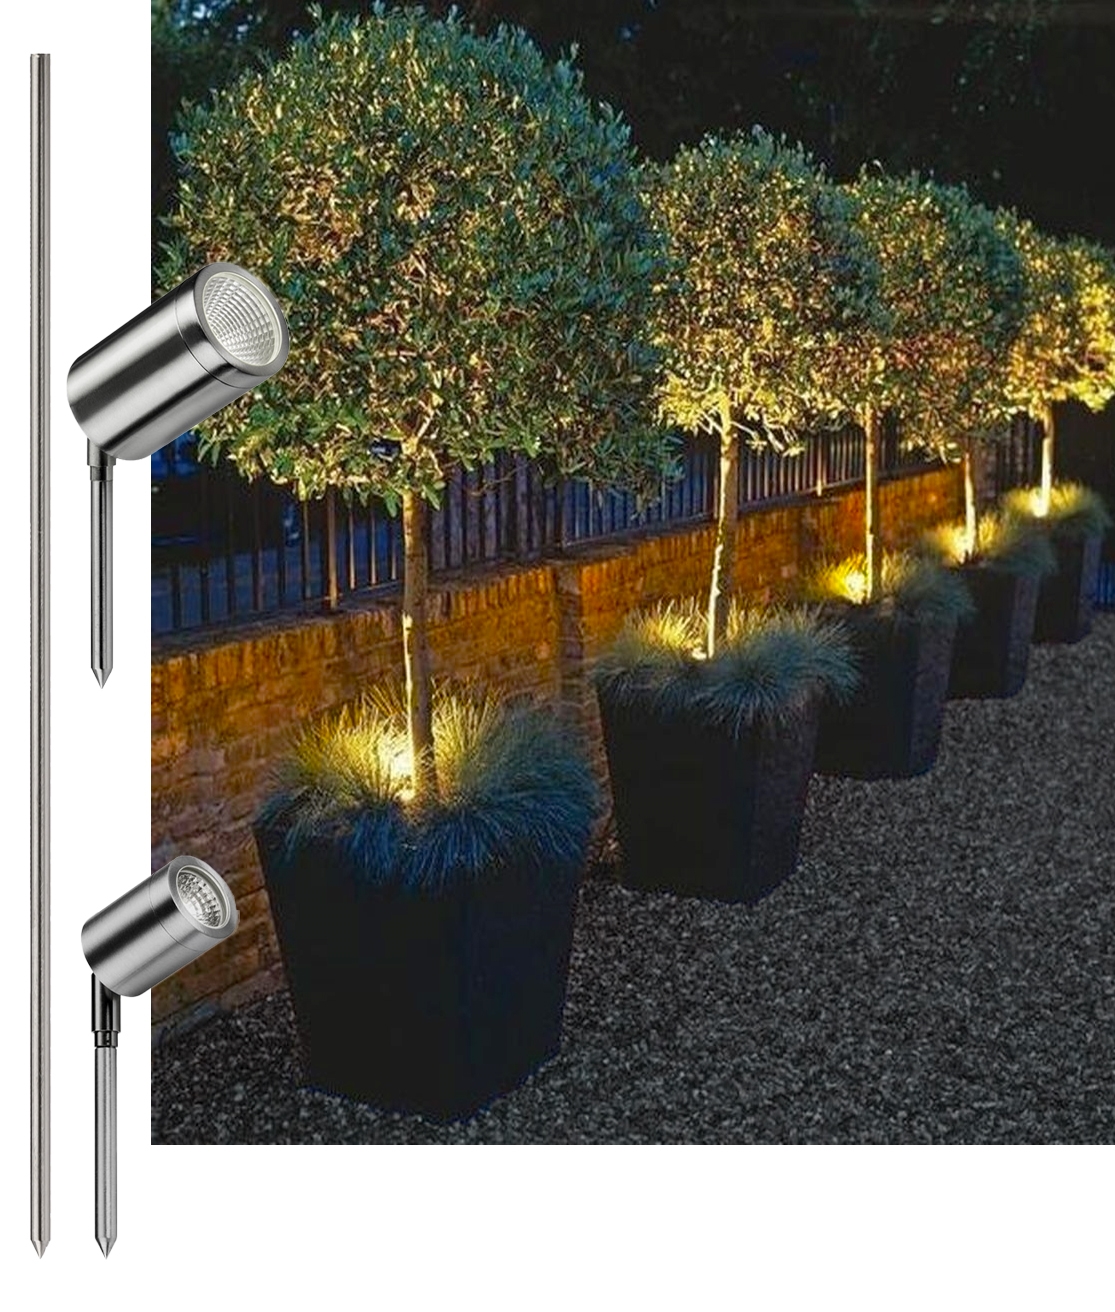 Spike Light - Small Enough be used in a Planter - Stainless Steel